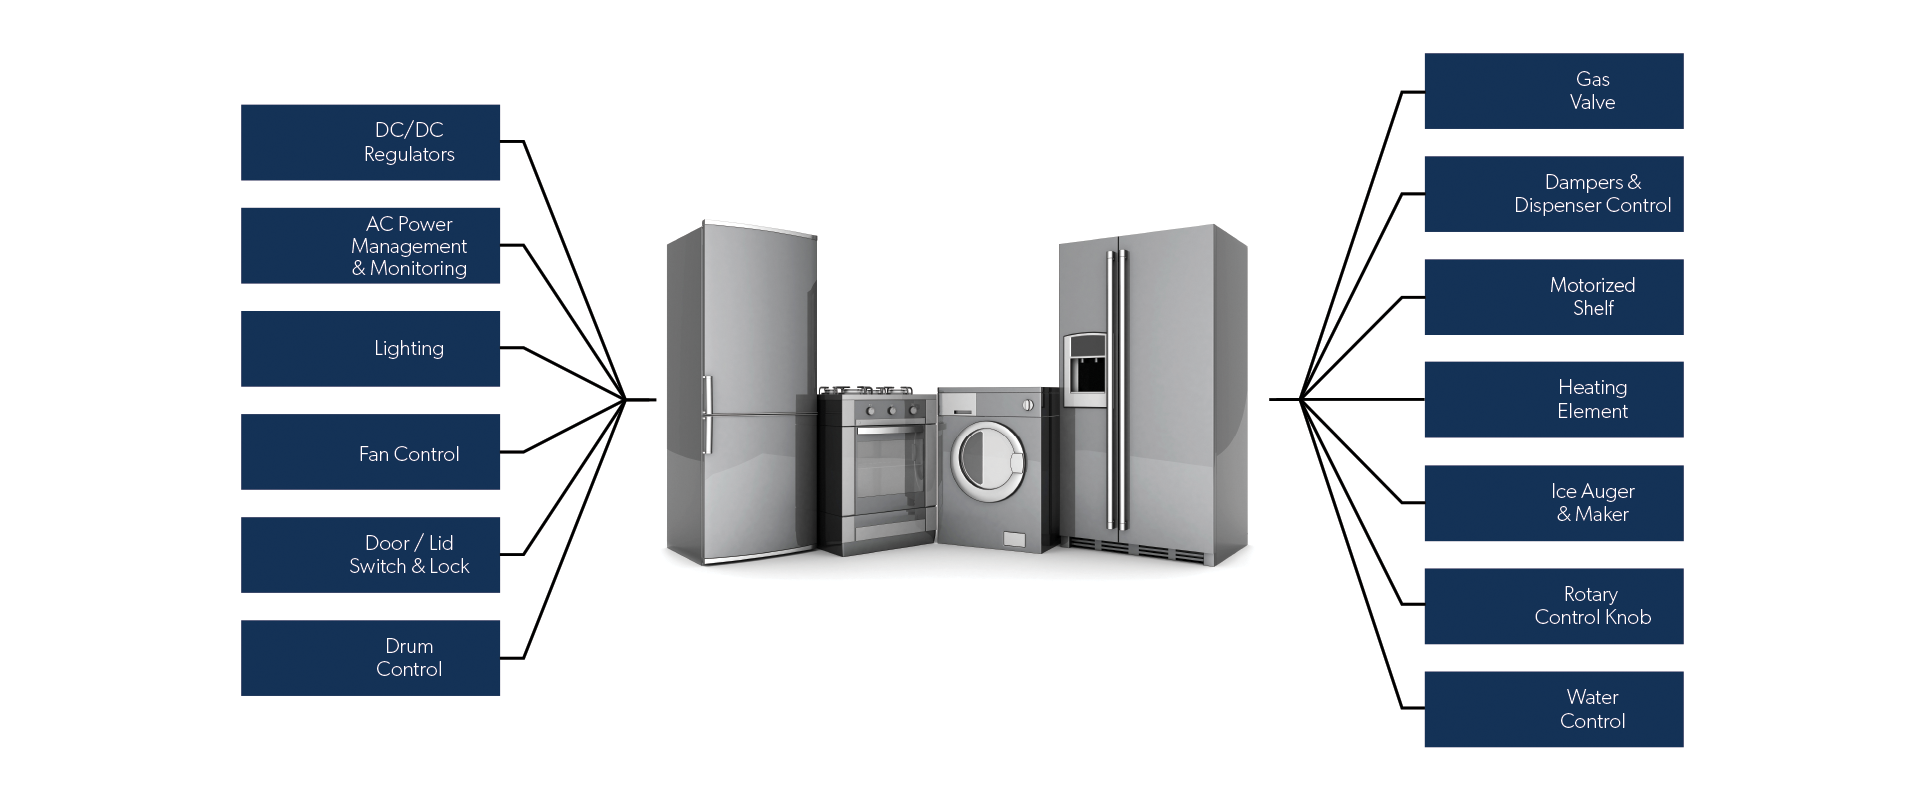 Kitchen appliances with callouts for Allegro Parts. Left to Right: Freezer, Washer, Dryer, Refrigerator